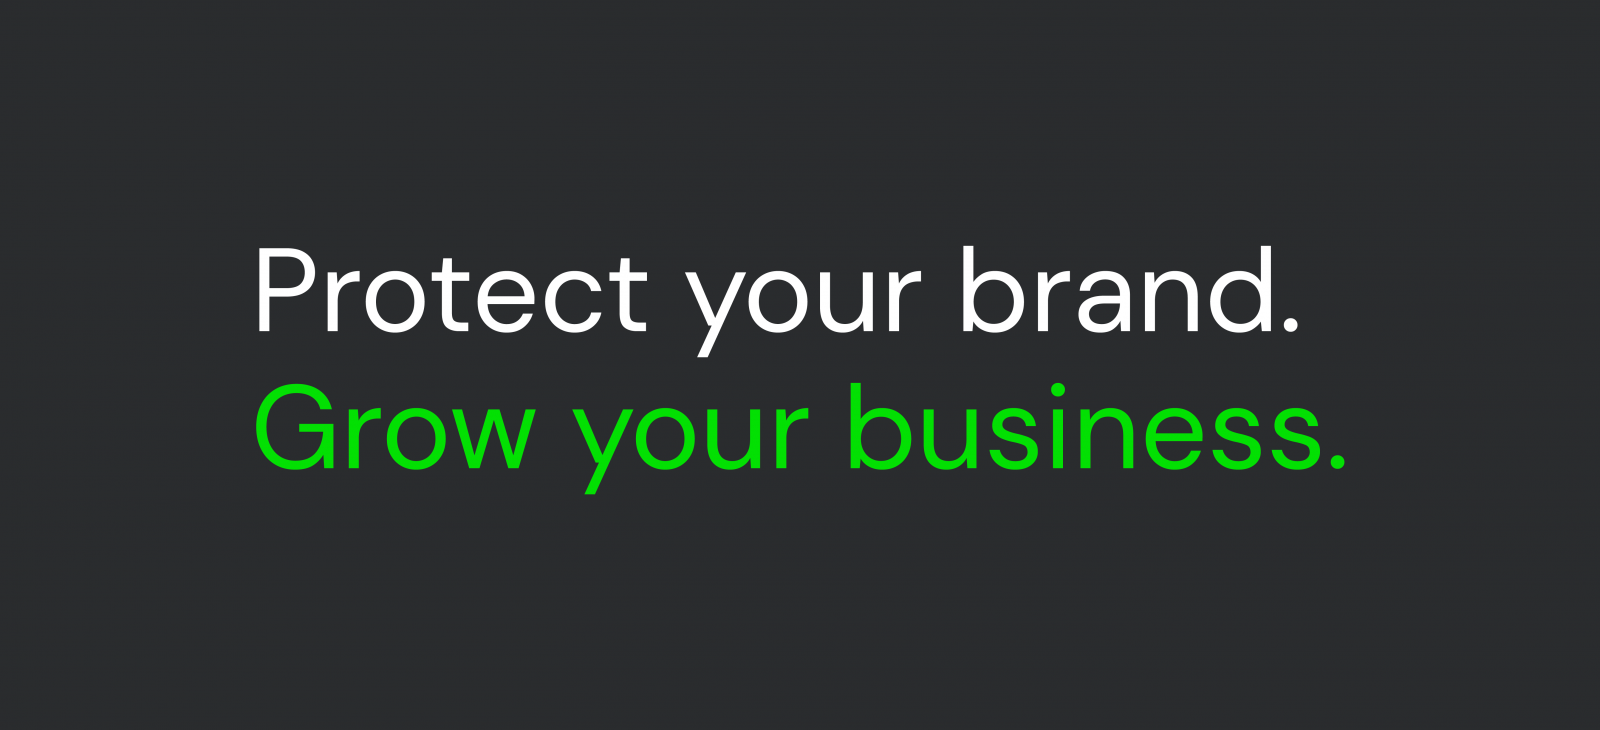 Protect your brand. Grow your business.